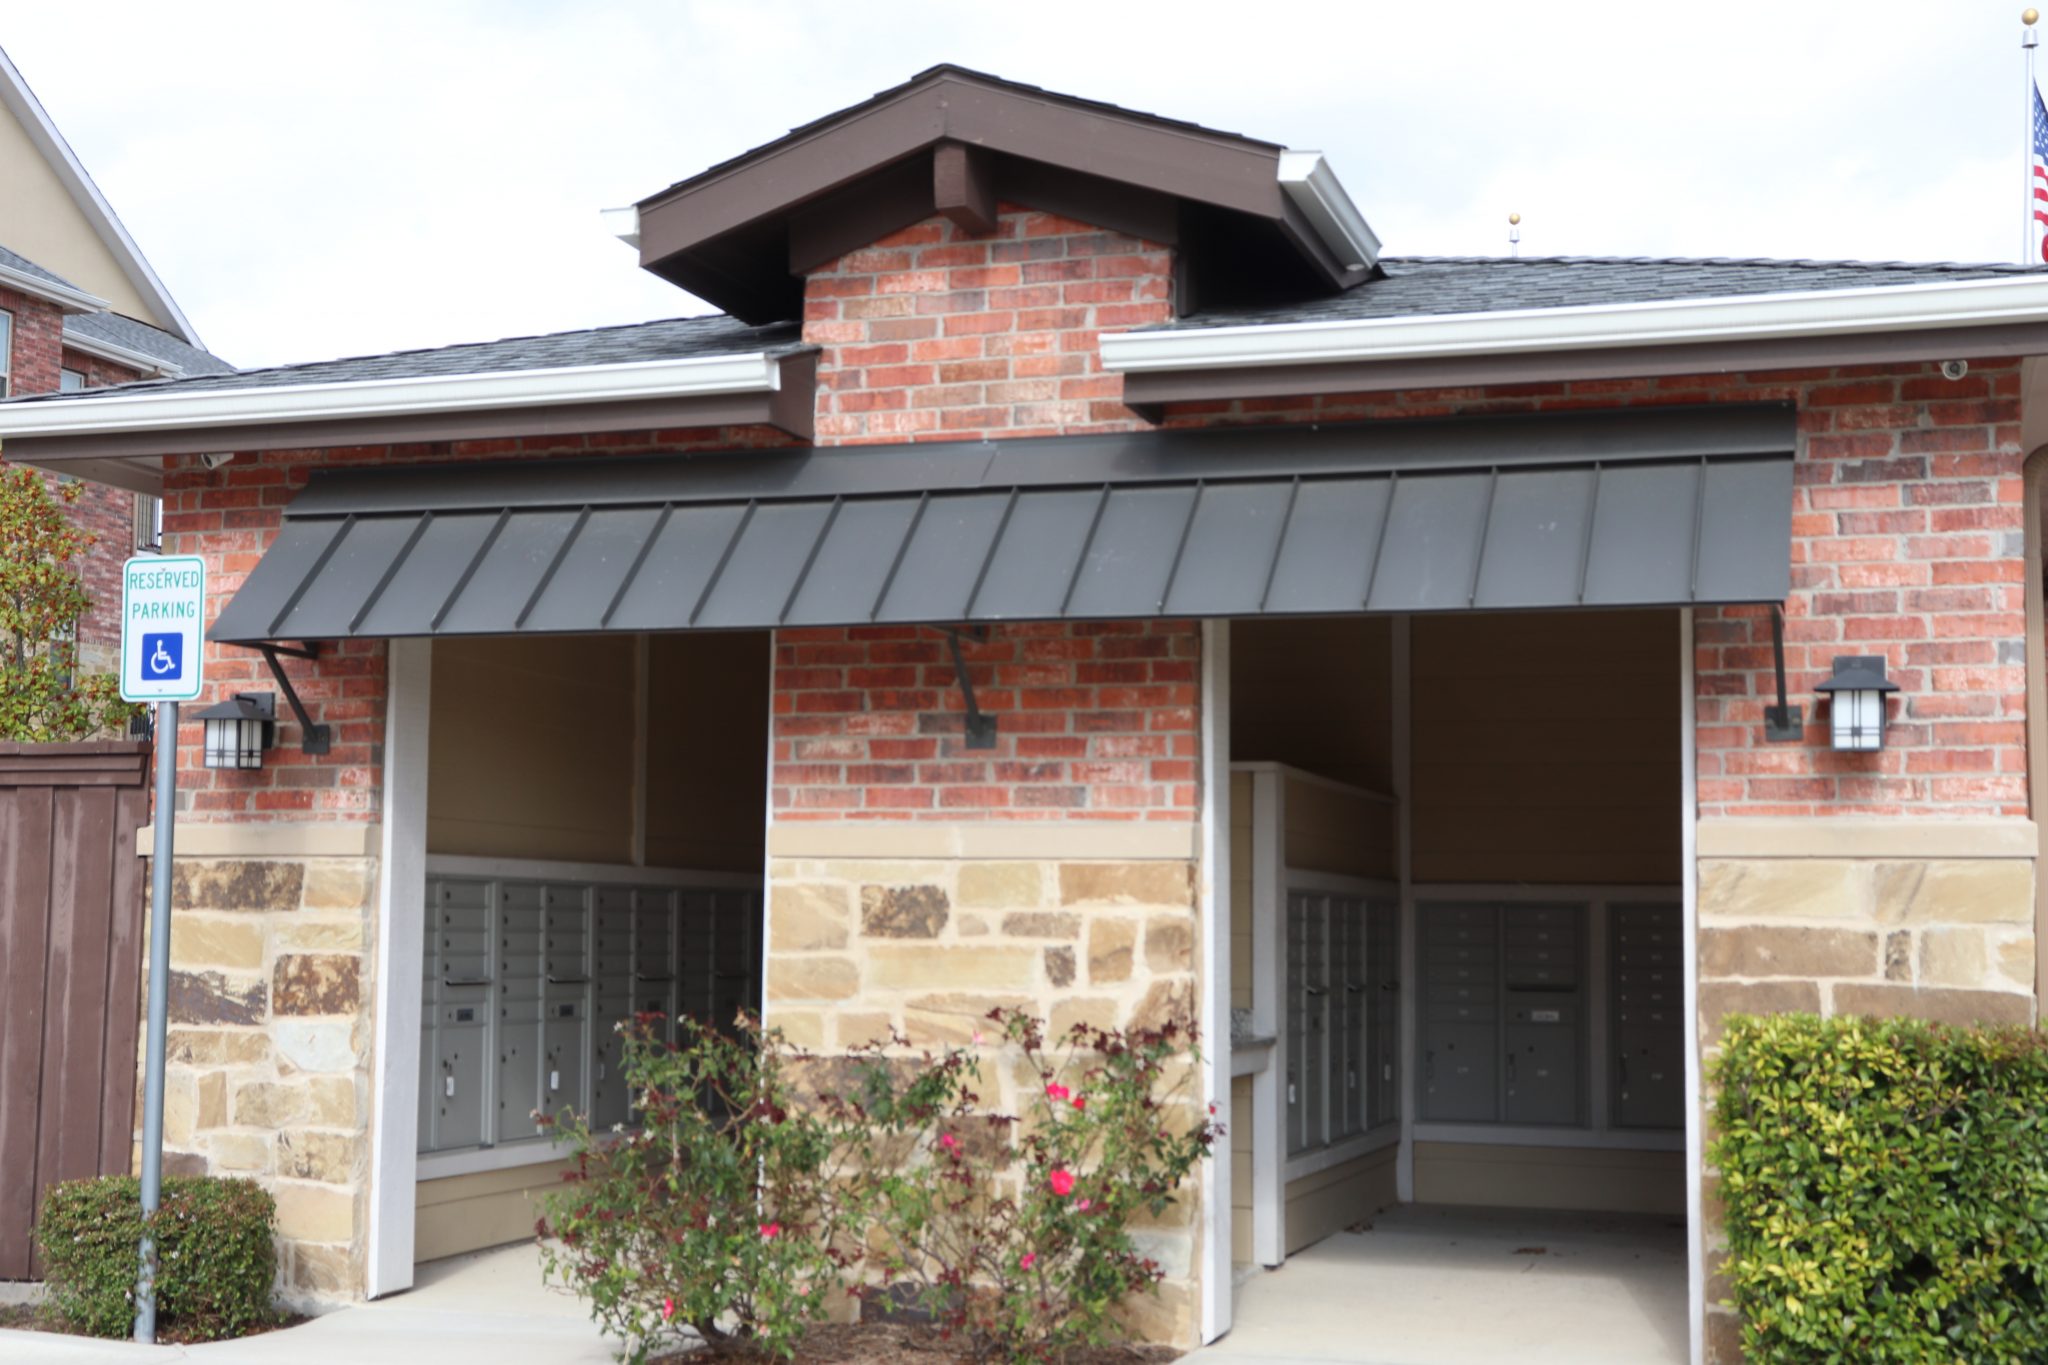 Commercial Metal Awnings Exterior Building/Standing Seam